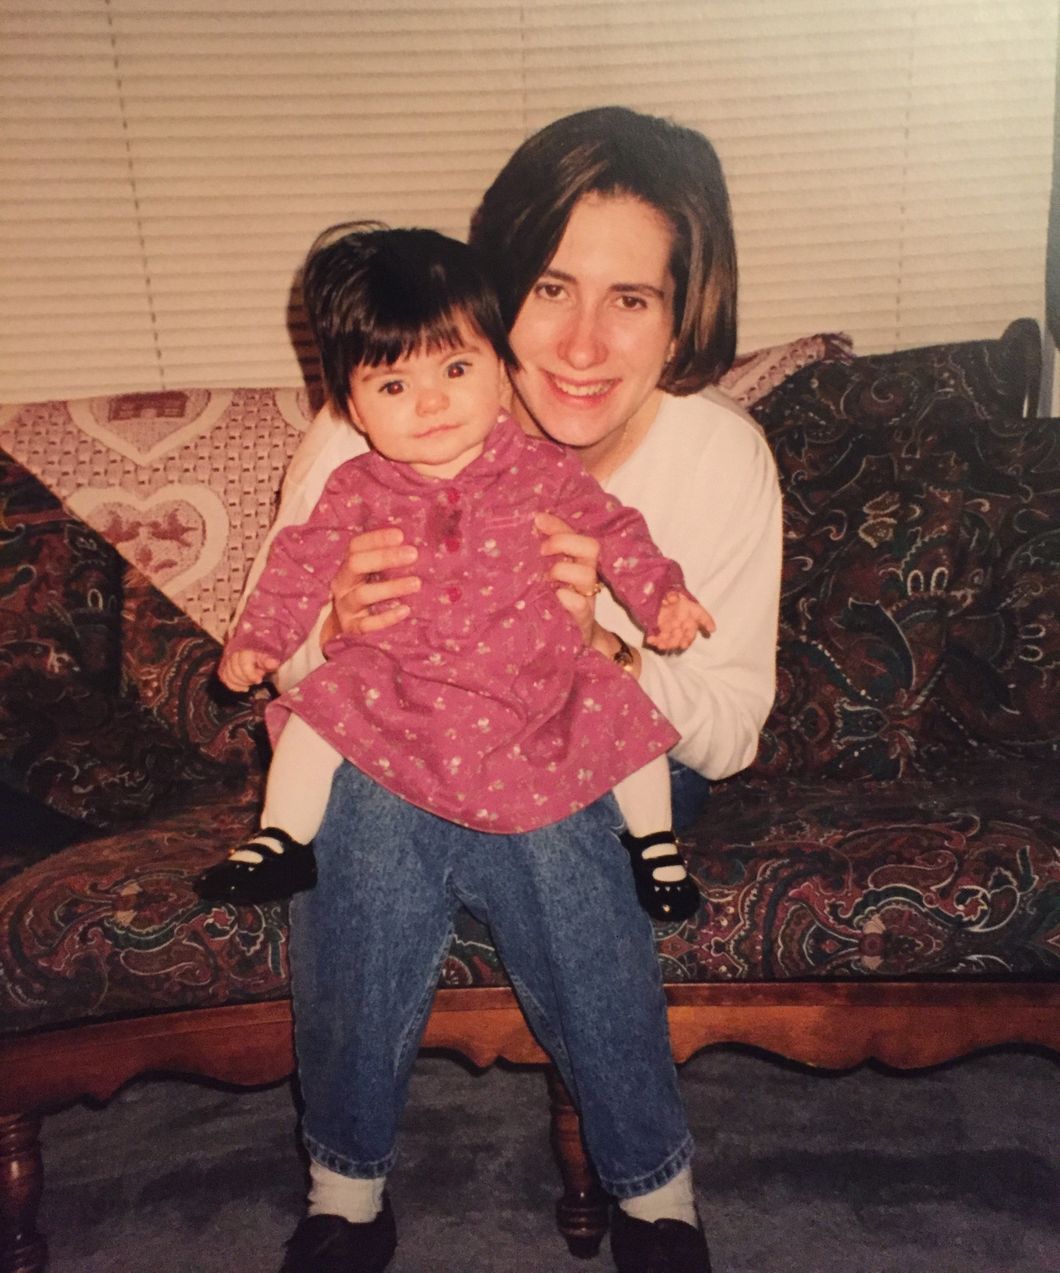 My Parents May Have Gotten Divorced, But I’ve Learned The Most About Love From My Mom